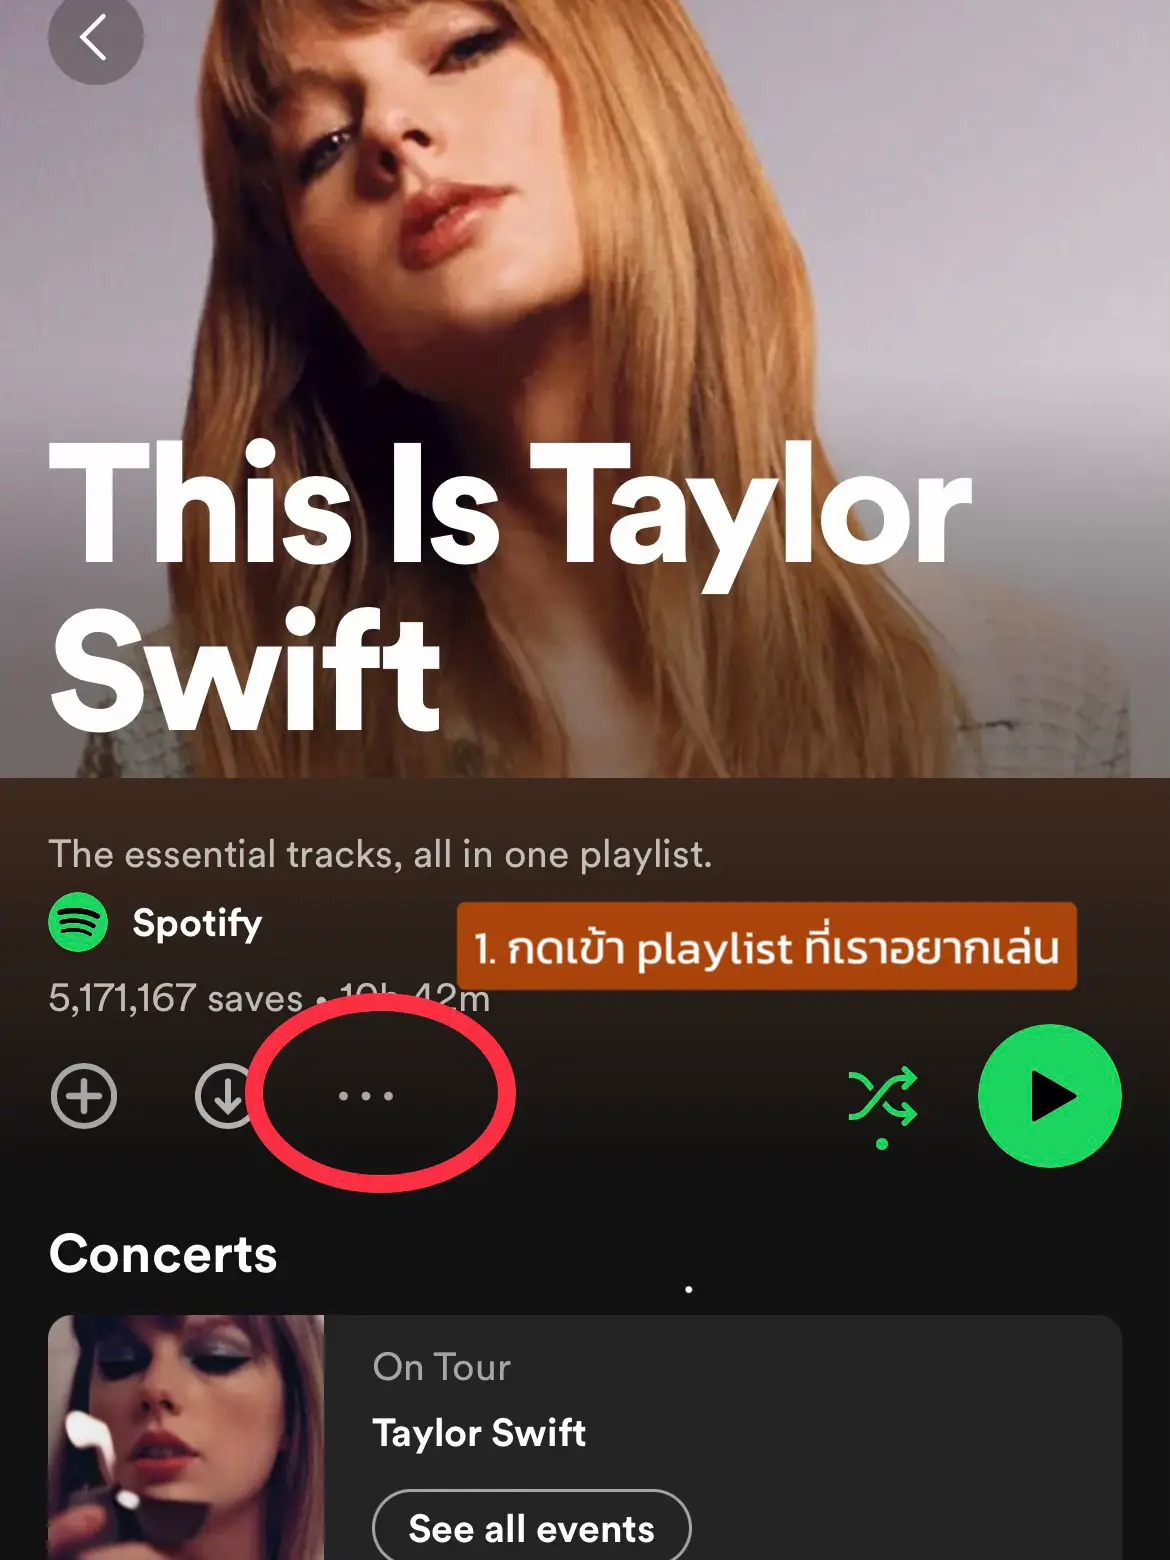 Play Snake On Spotify: How To Find The 'Eat This Playlist' Game